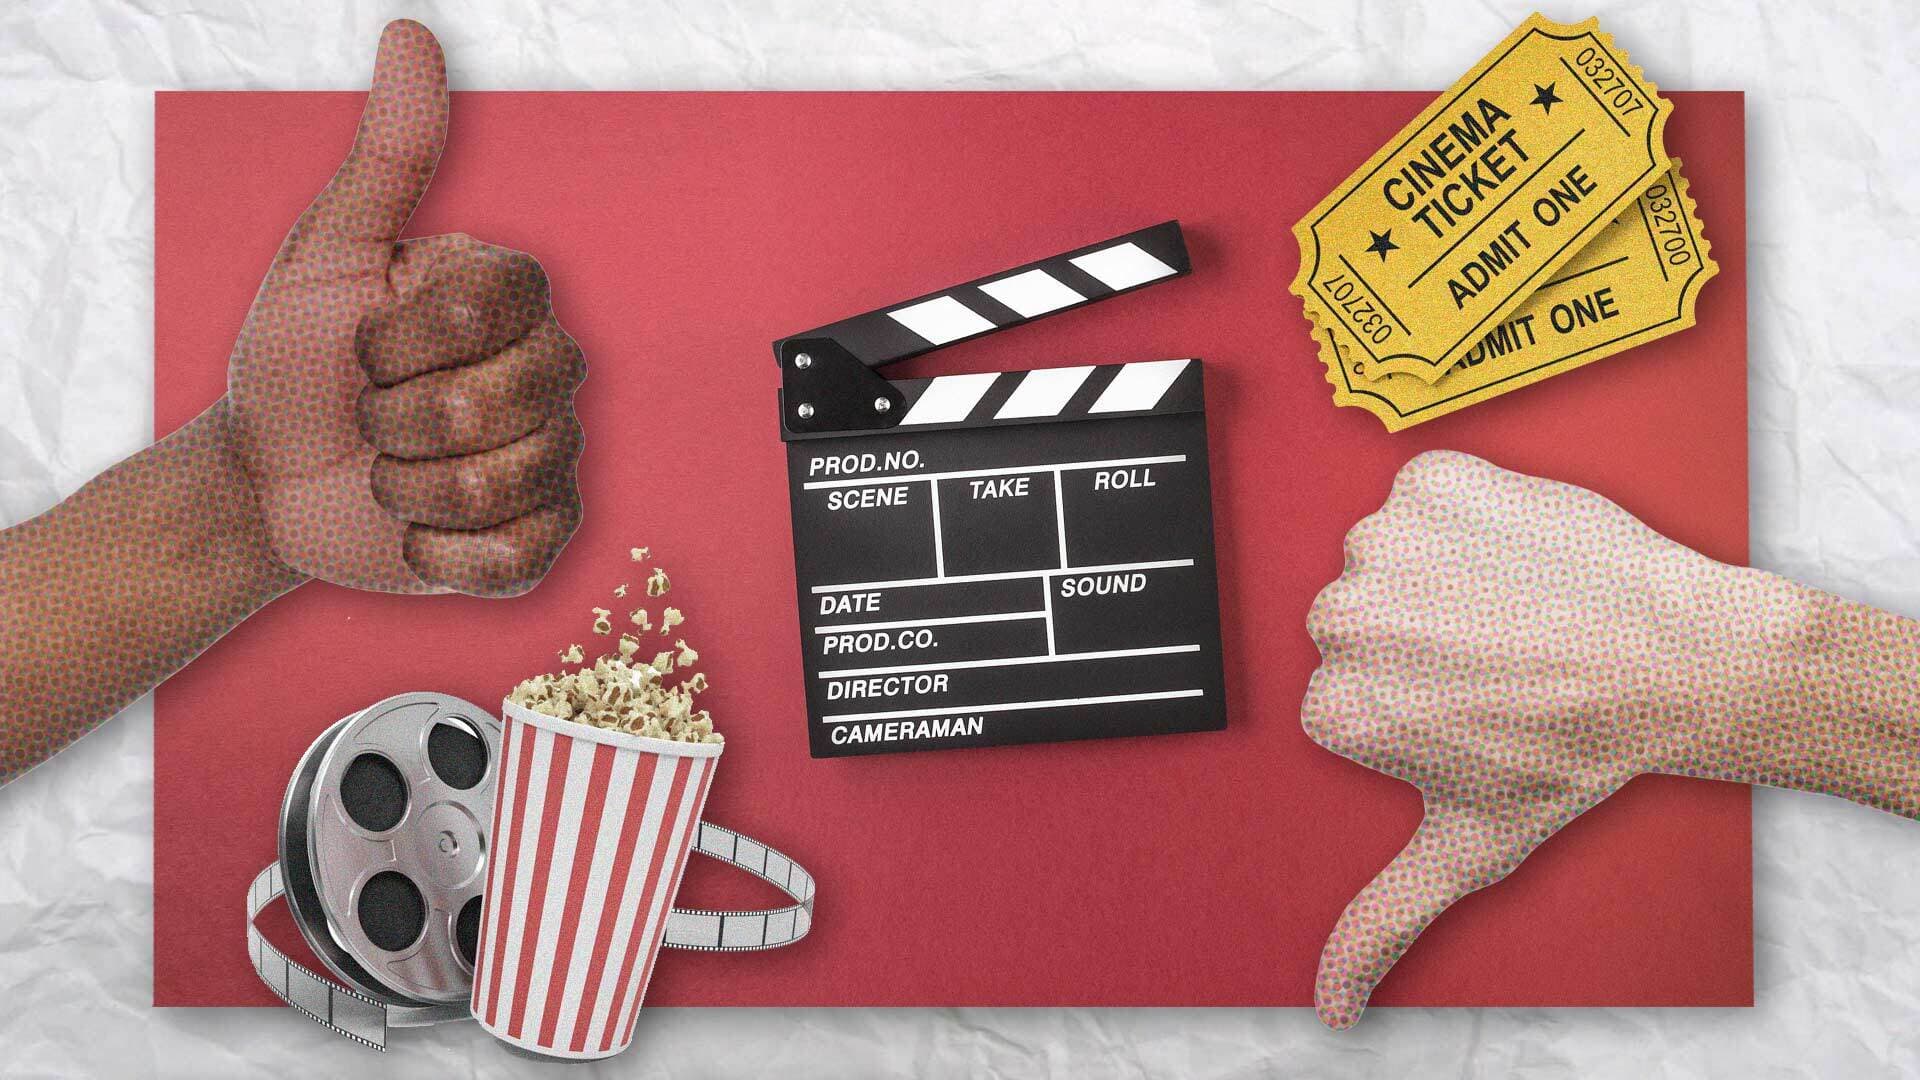 Collage of hands showing thumbs up and down, popcorn, a reel of film, movie tickets and a clapperboard